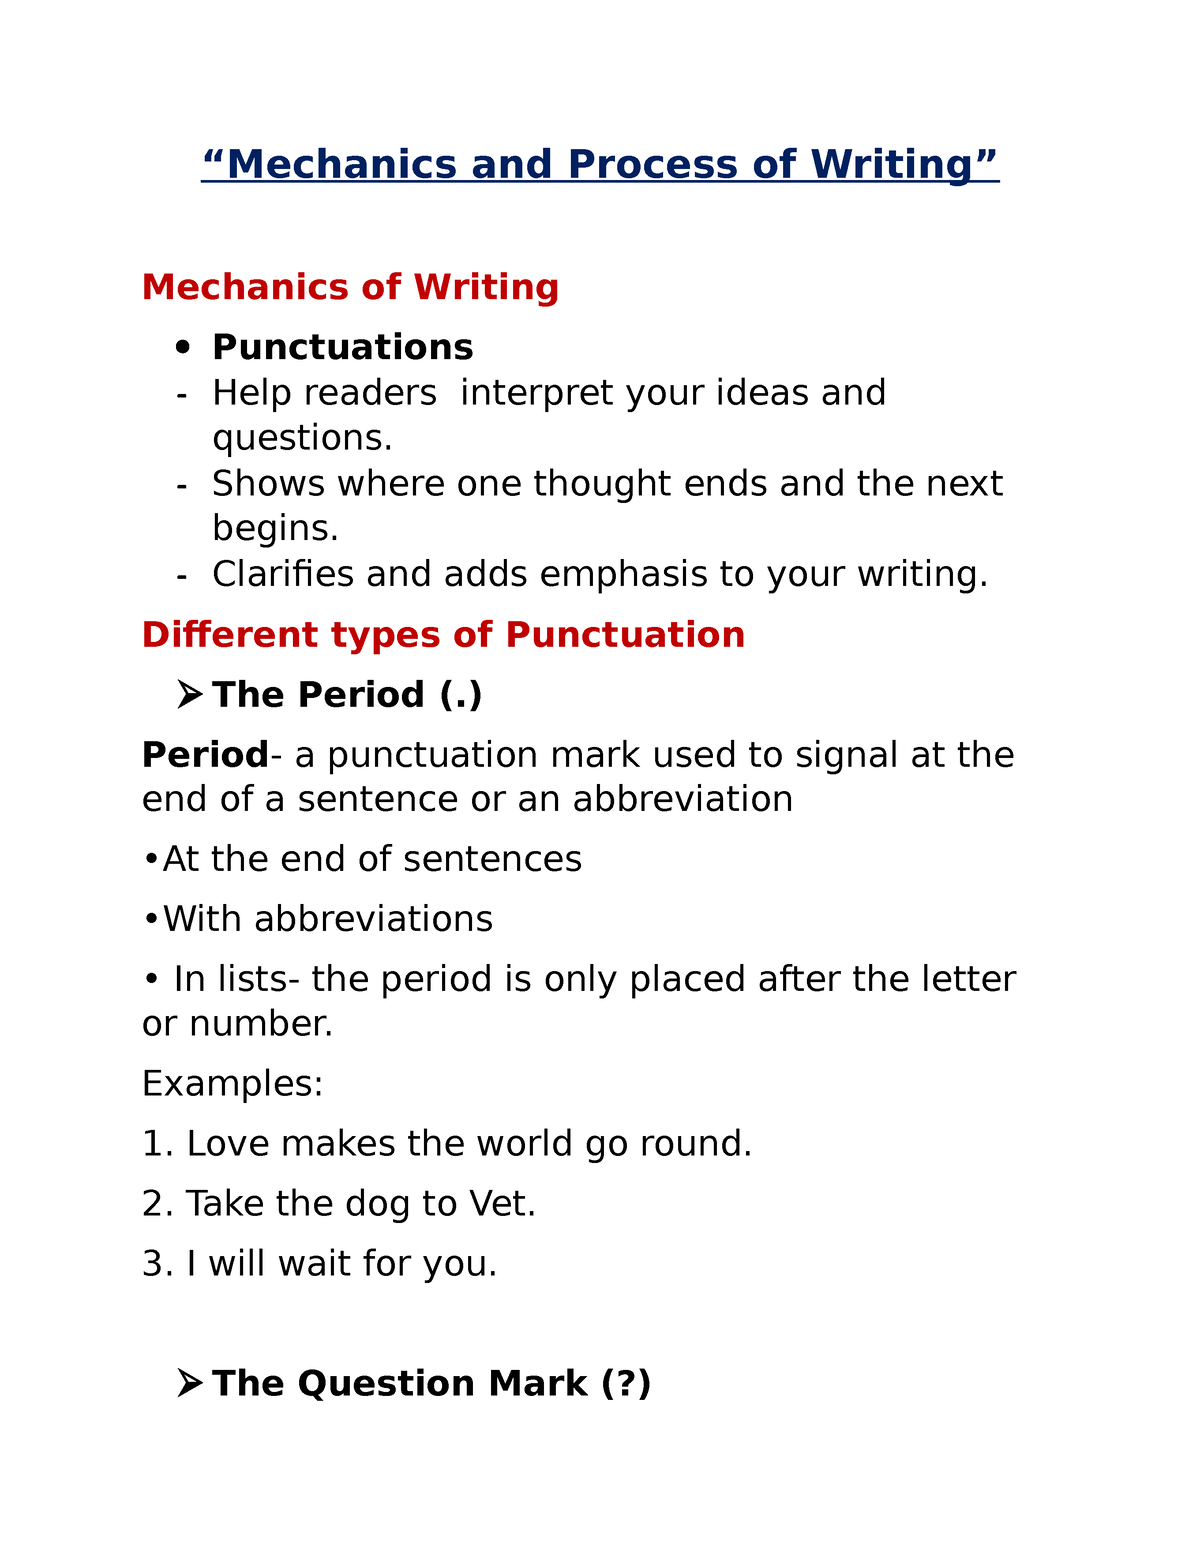 write an essay on the mechanics of writing introduction